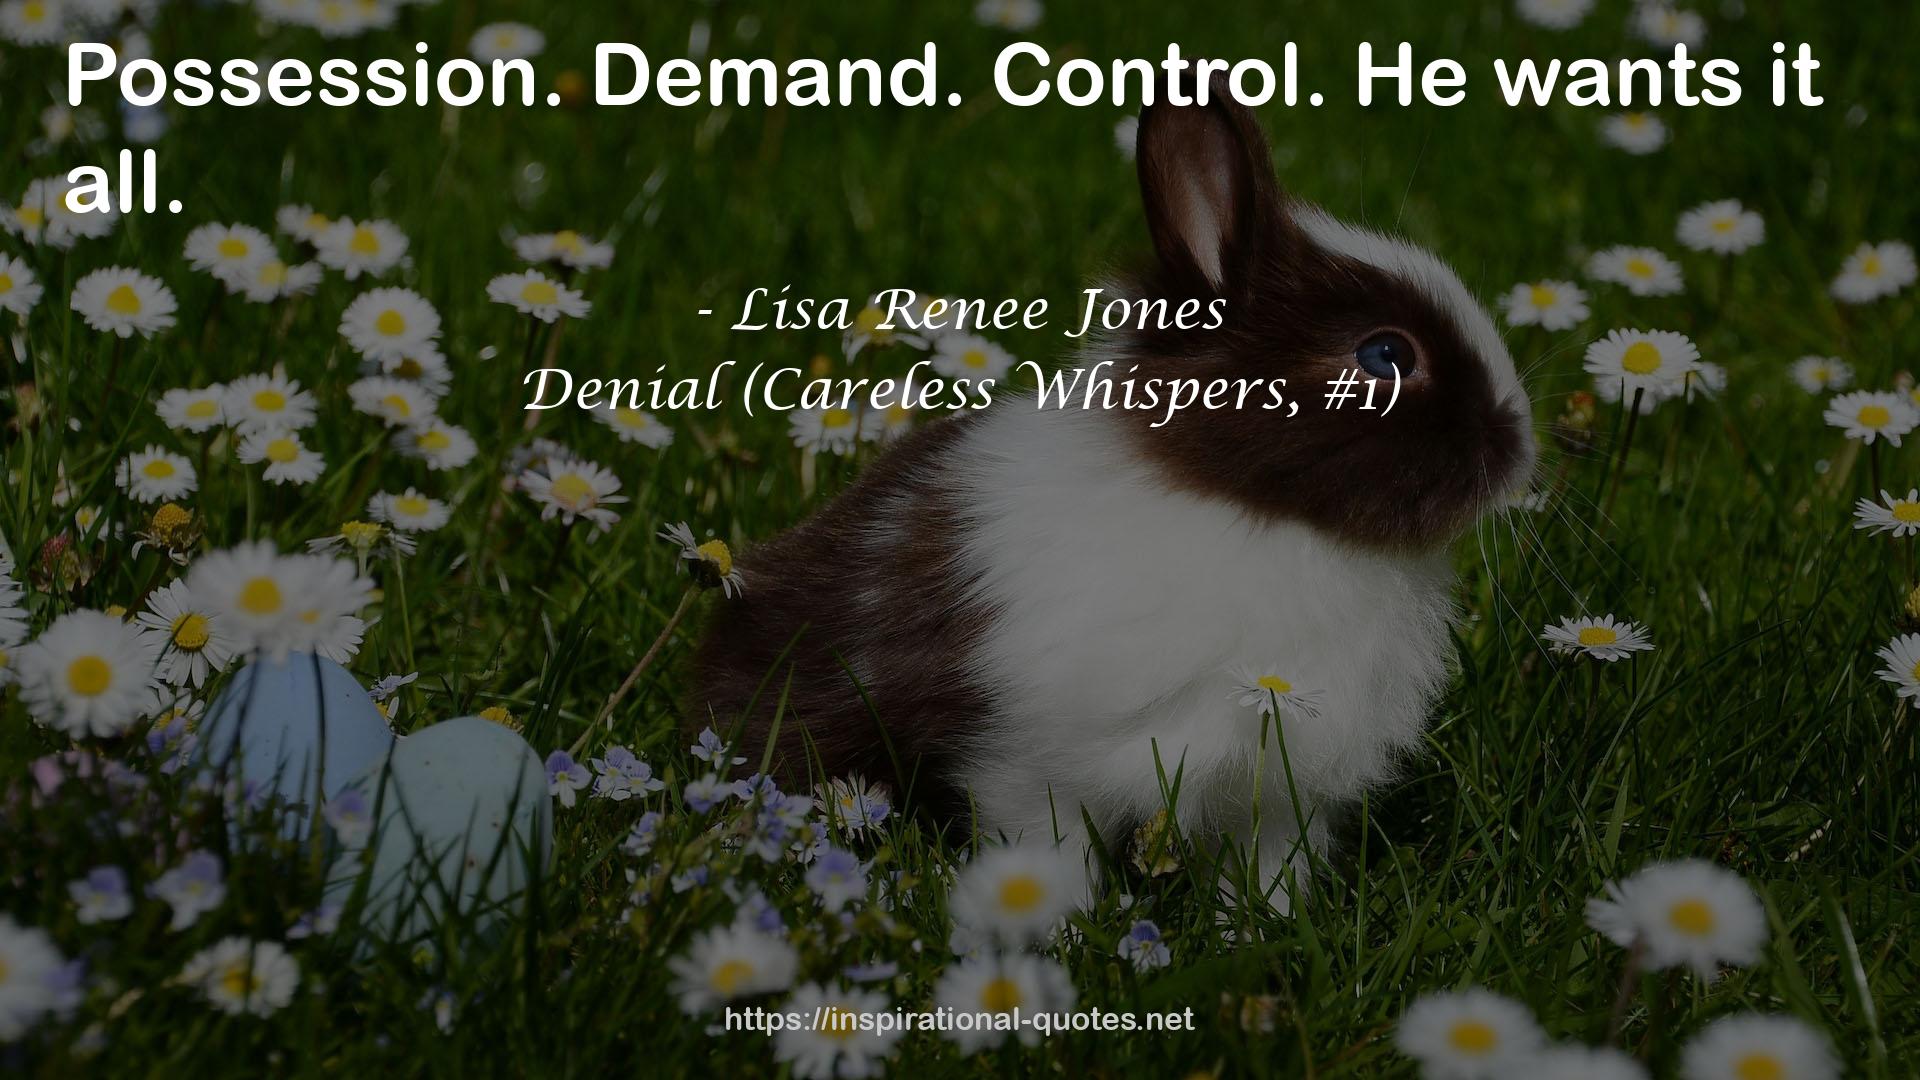 Denial (Careless Whispers, #1) QUOTES